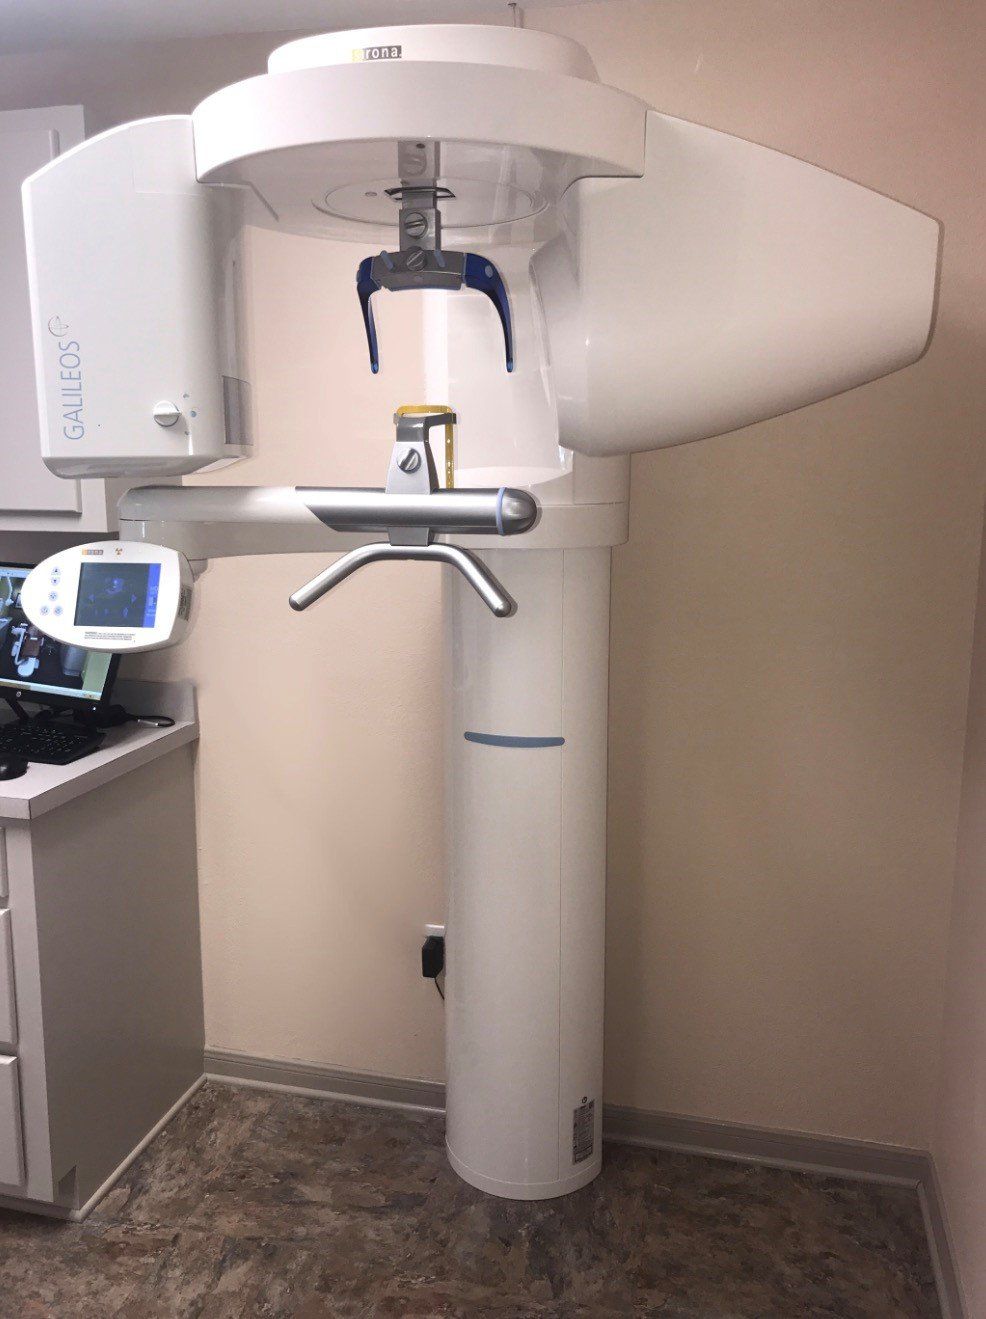 scanner used by dentists